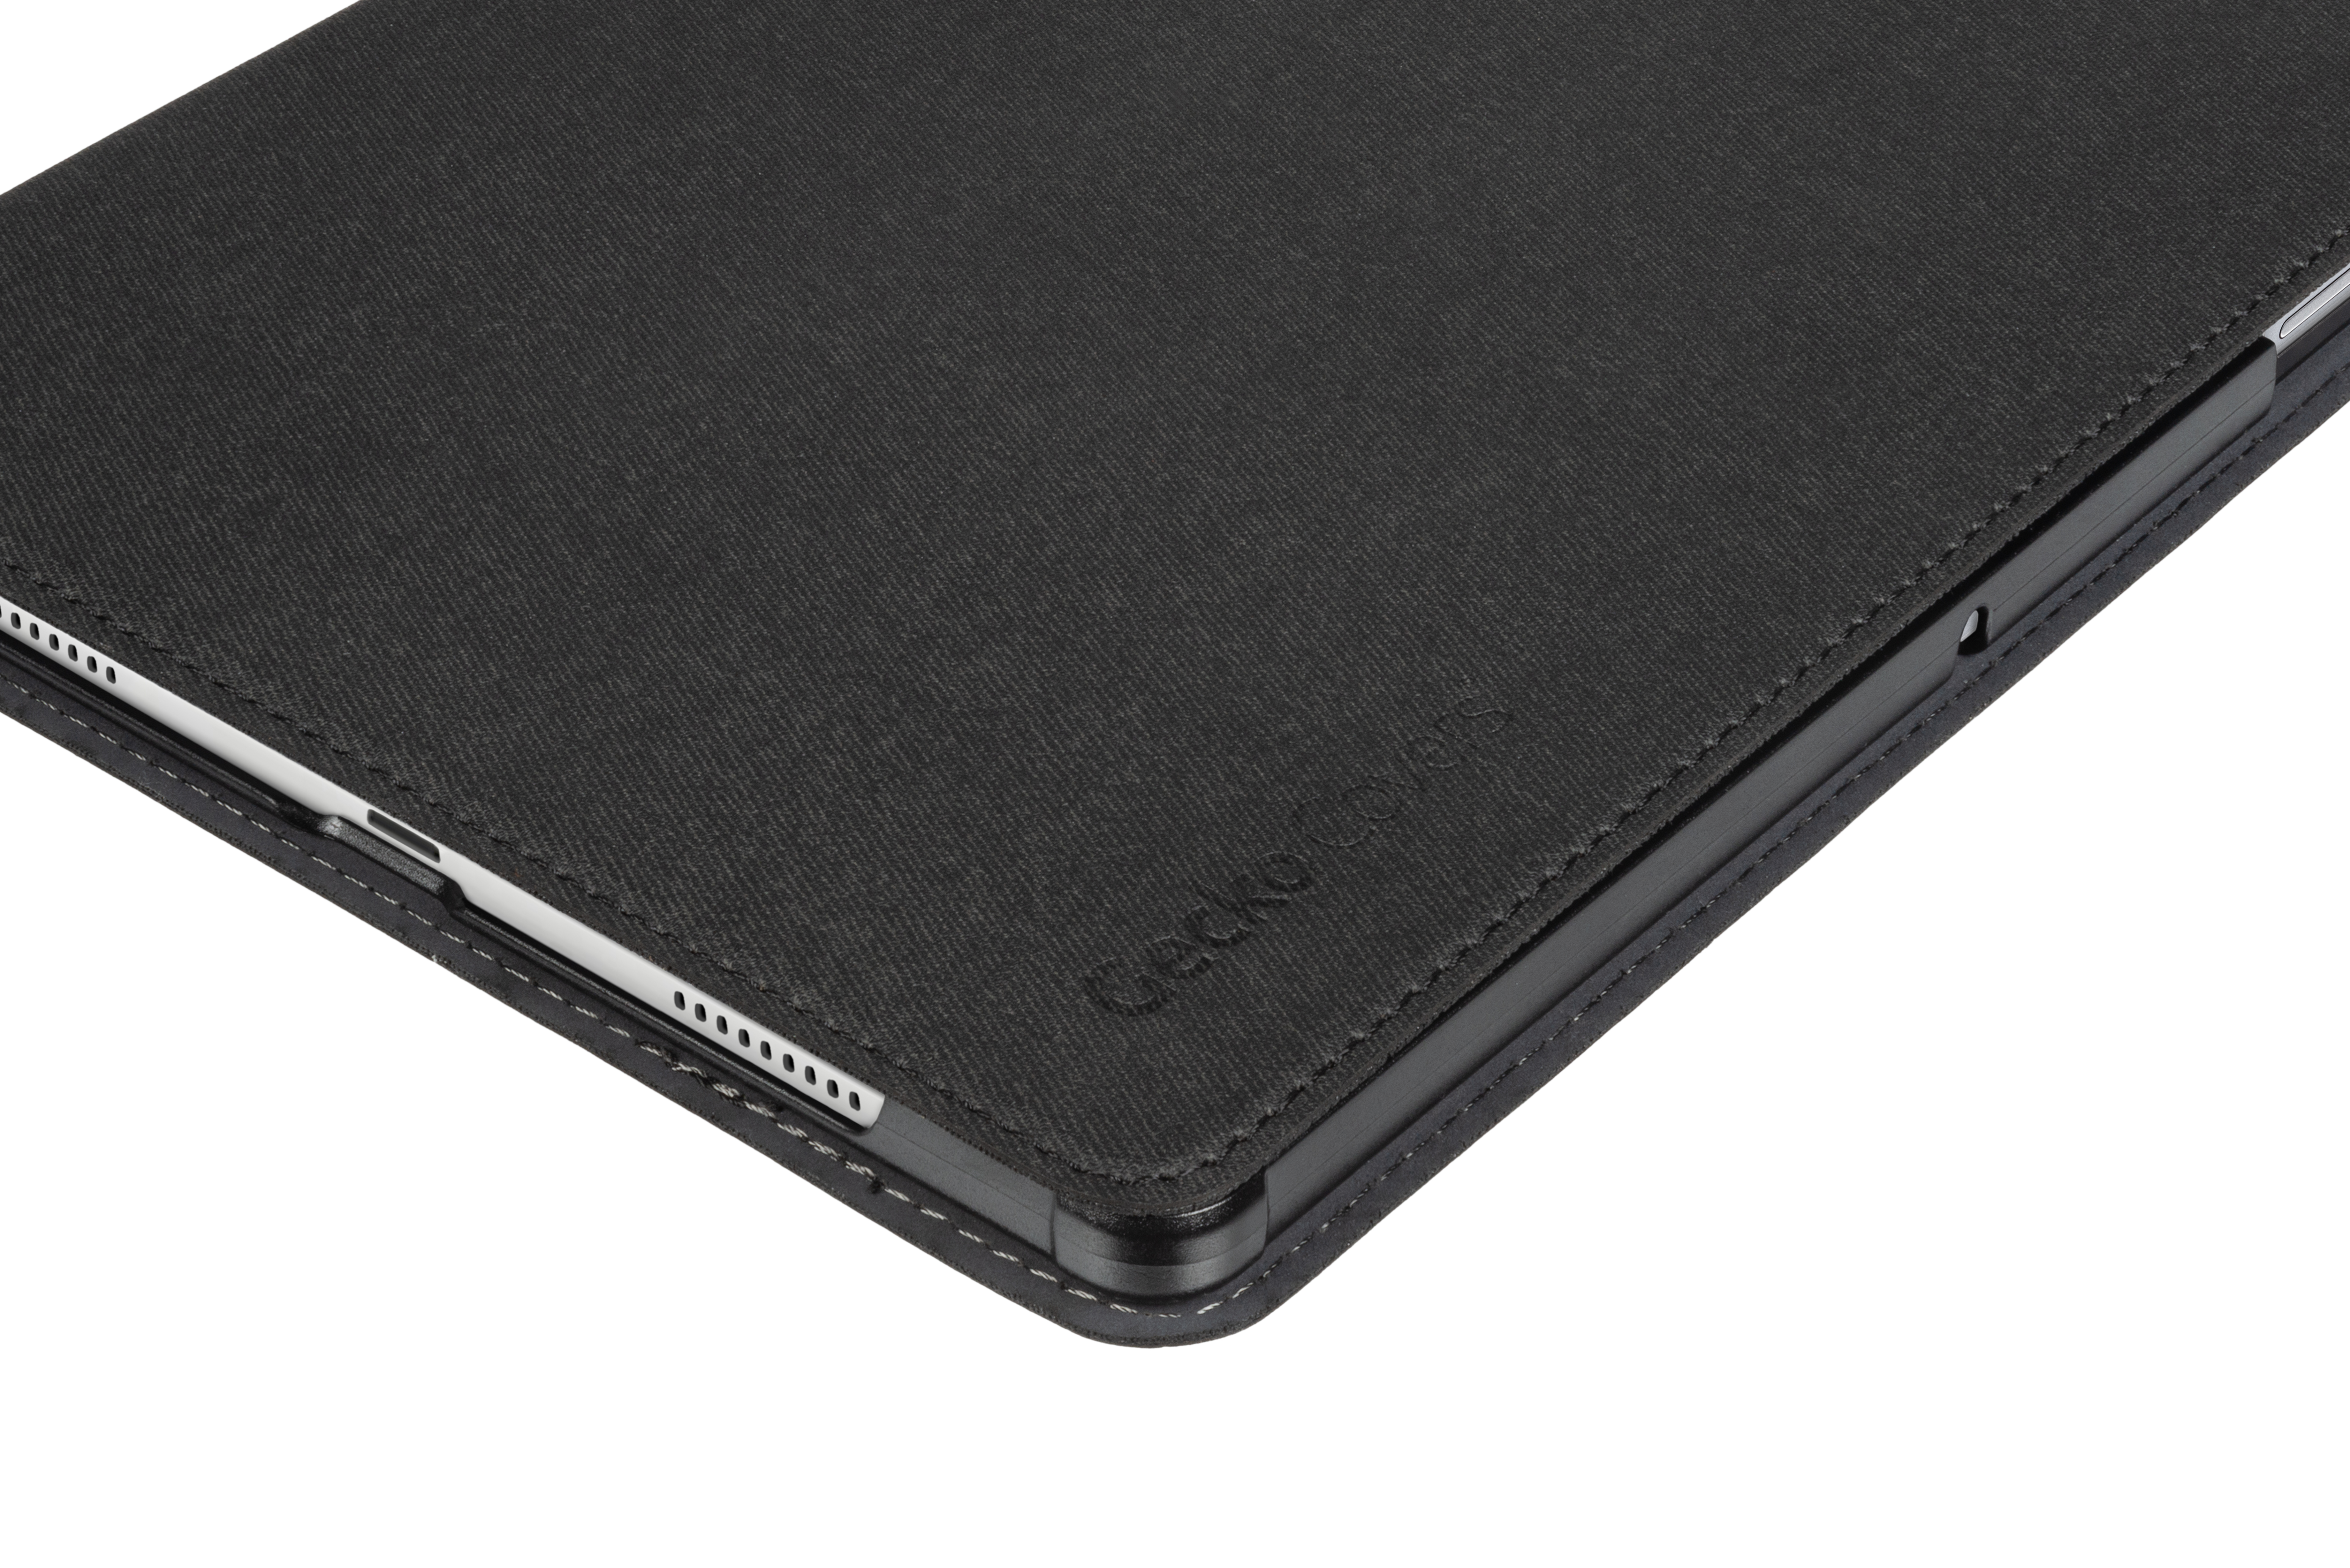 für Easy-Click GECKO 2.0 Samsung Leather, Black Bookcover COVERS (2021) Hülle Tablet Galaxy A8 PU Tab